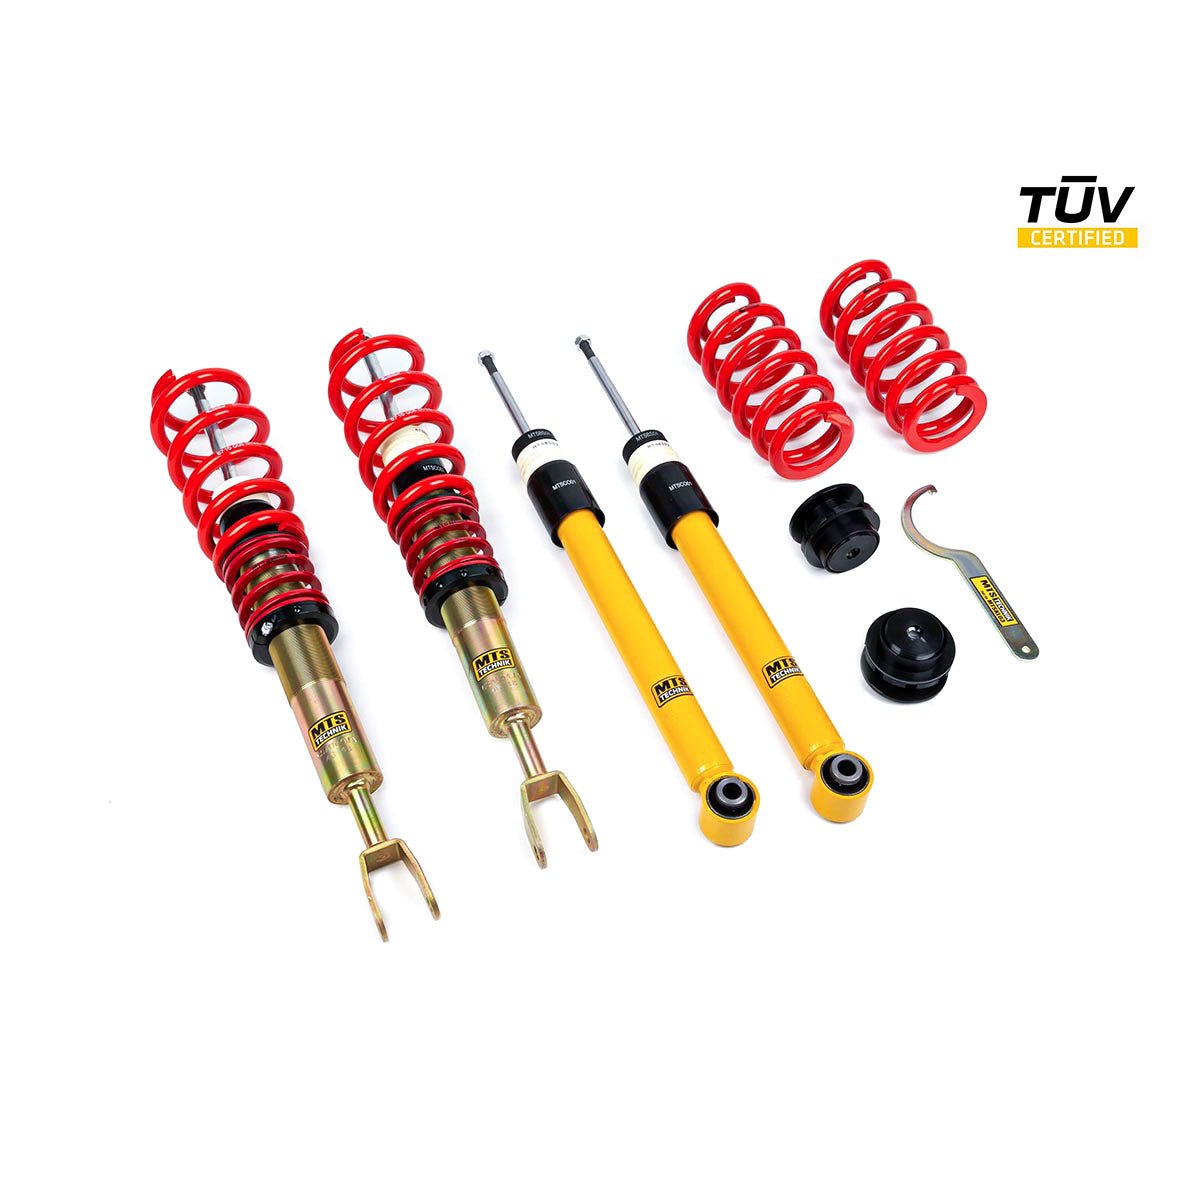 MTS TECHNIK coilover kit STREET Audi A4 B6 B7 Cabrio (with TÜV) - PARTS33 GmbH